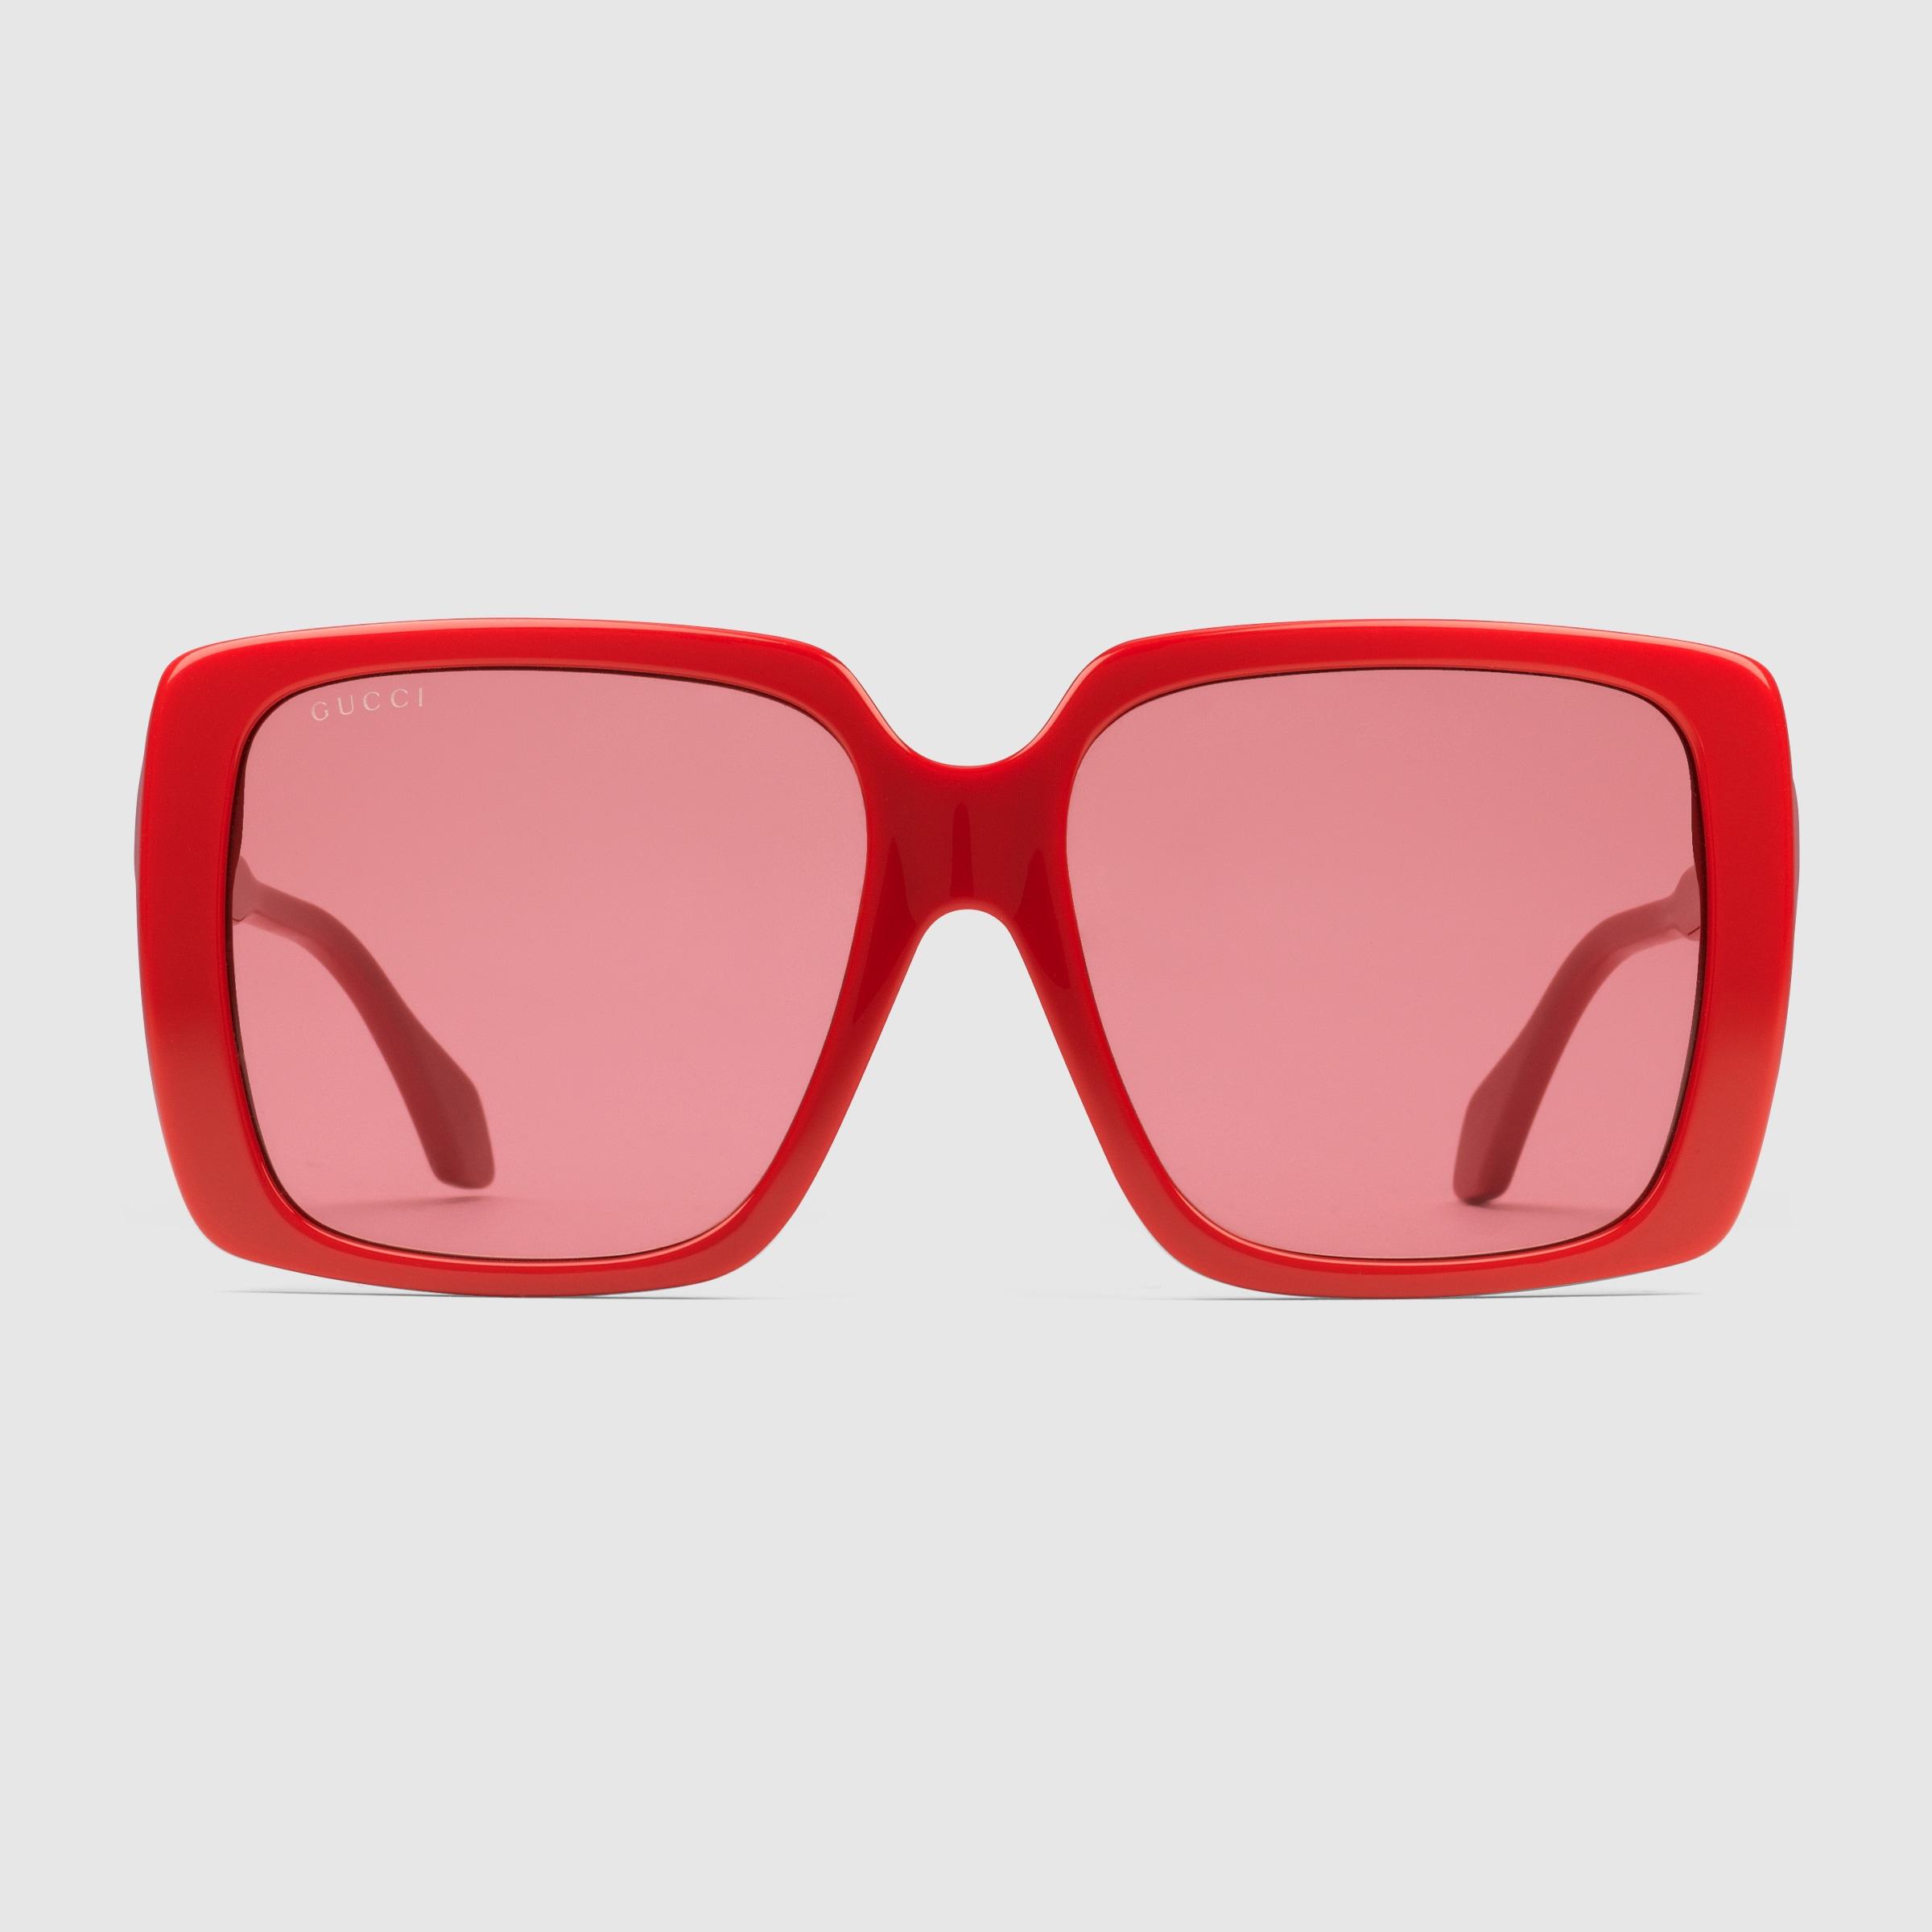 Gucci Low Nose Bridge Fit Square Sunglasses in Red | Lyst